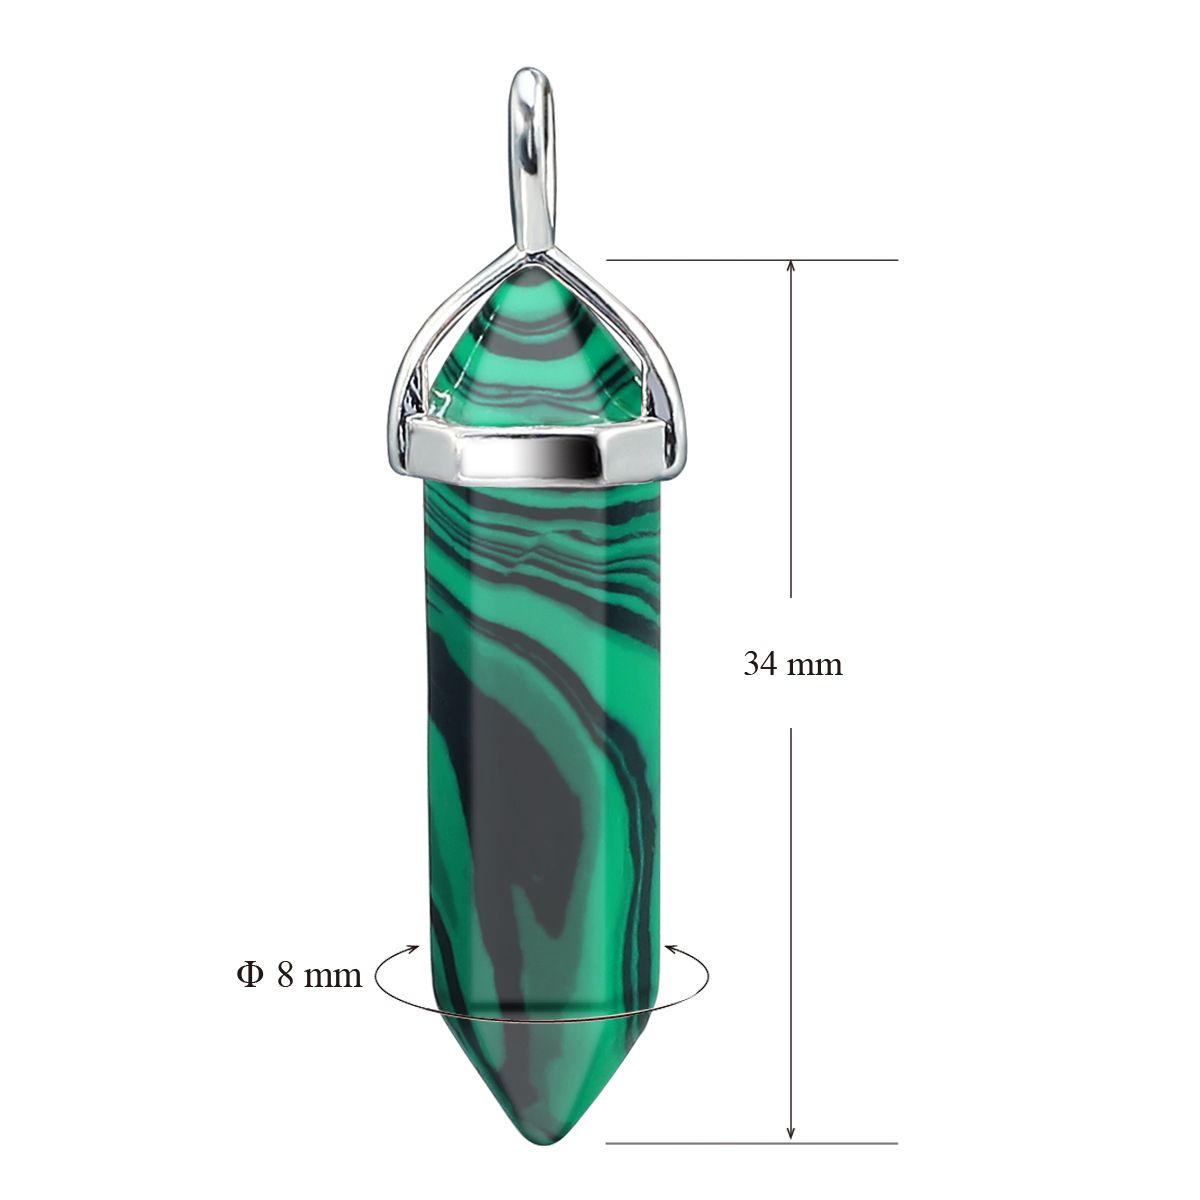 Crystu Malachite Pendant Oval Shape Crystal Stone Pendant with Chain for  Reiki Healing and Crystal Healing Stone Pendant Size 35-40 mm Approx (Color  : Green) : Amazon.in: Fashion